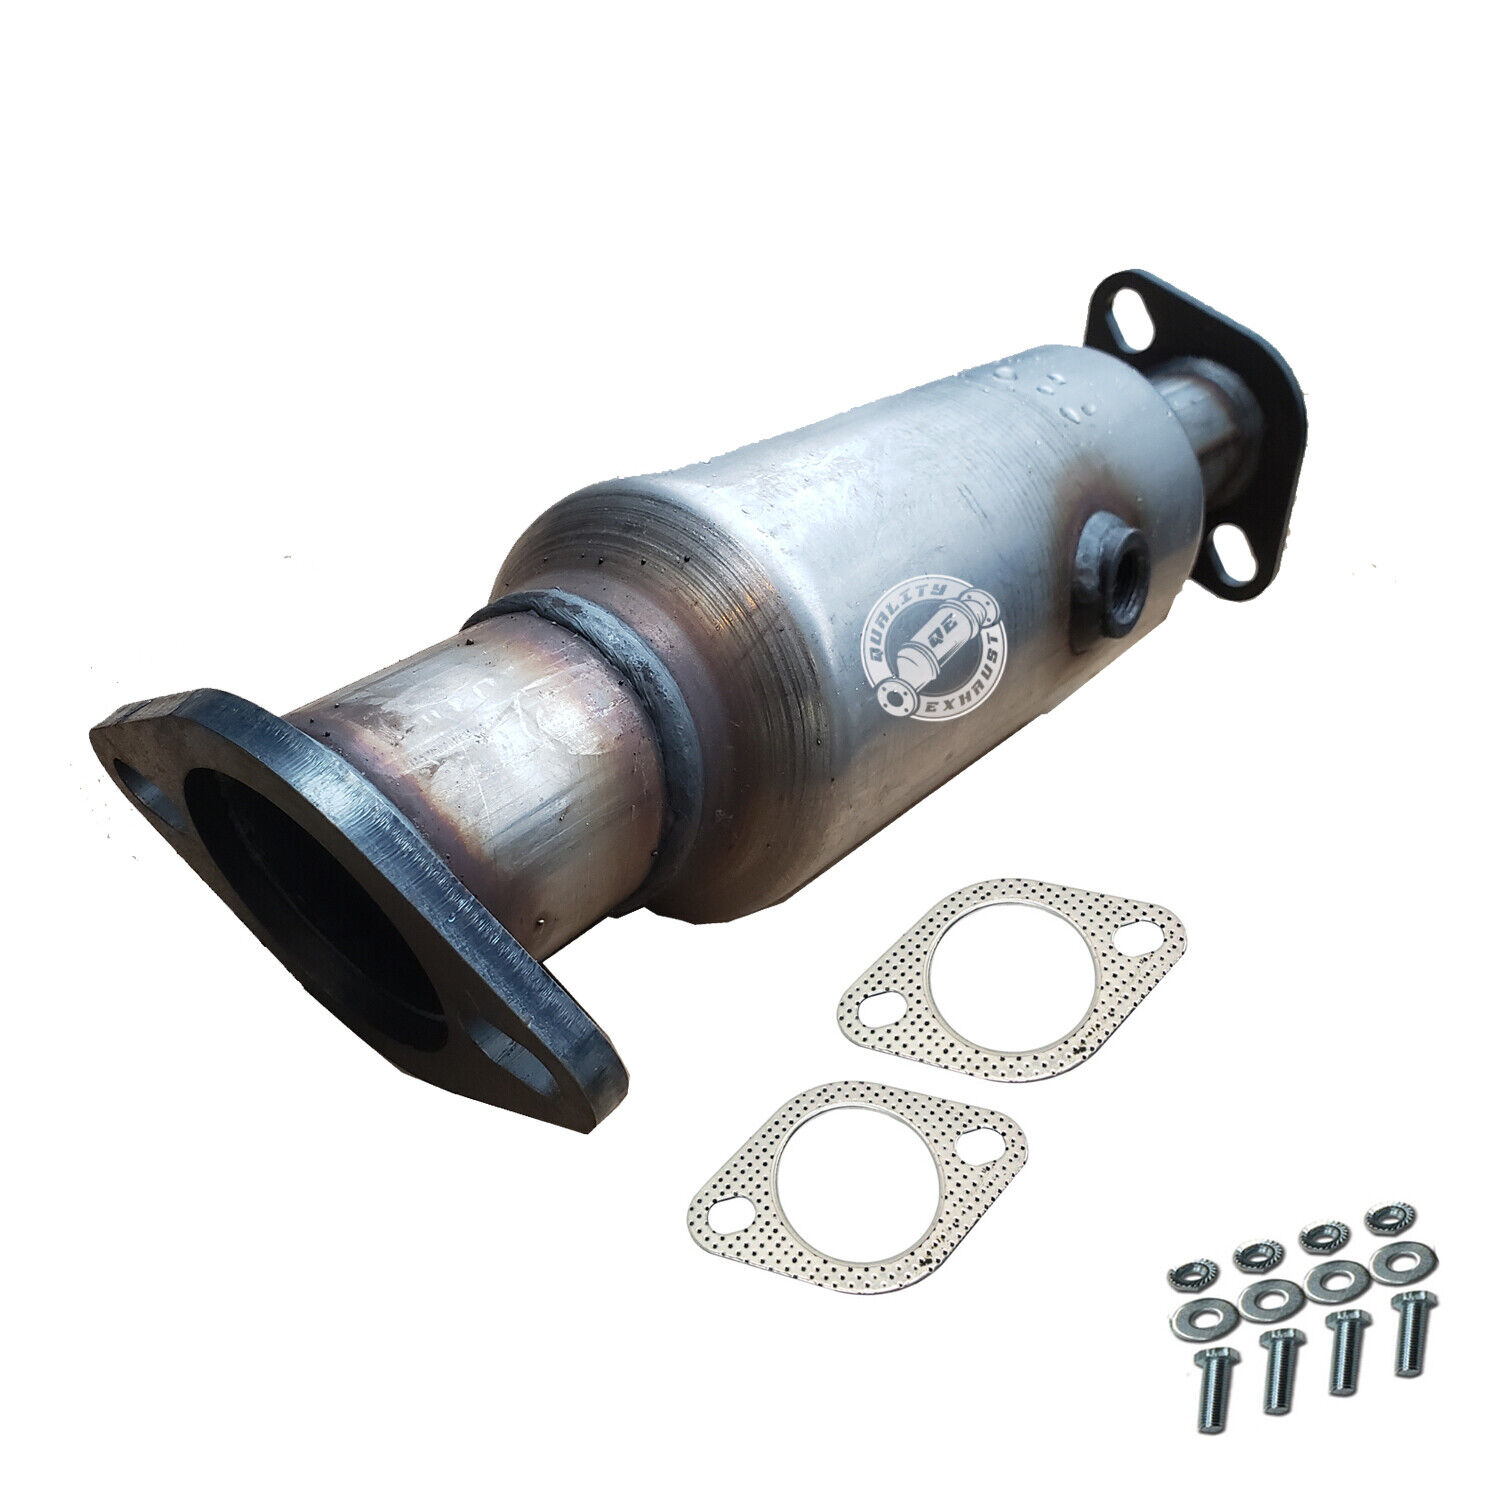 Catalytic Converter Fits 2010-2014 Kia Forte , Forte Koup 2.0L and 2.4L 